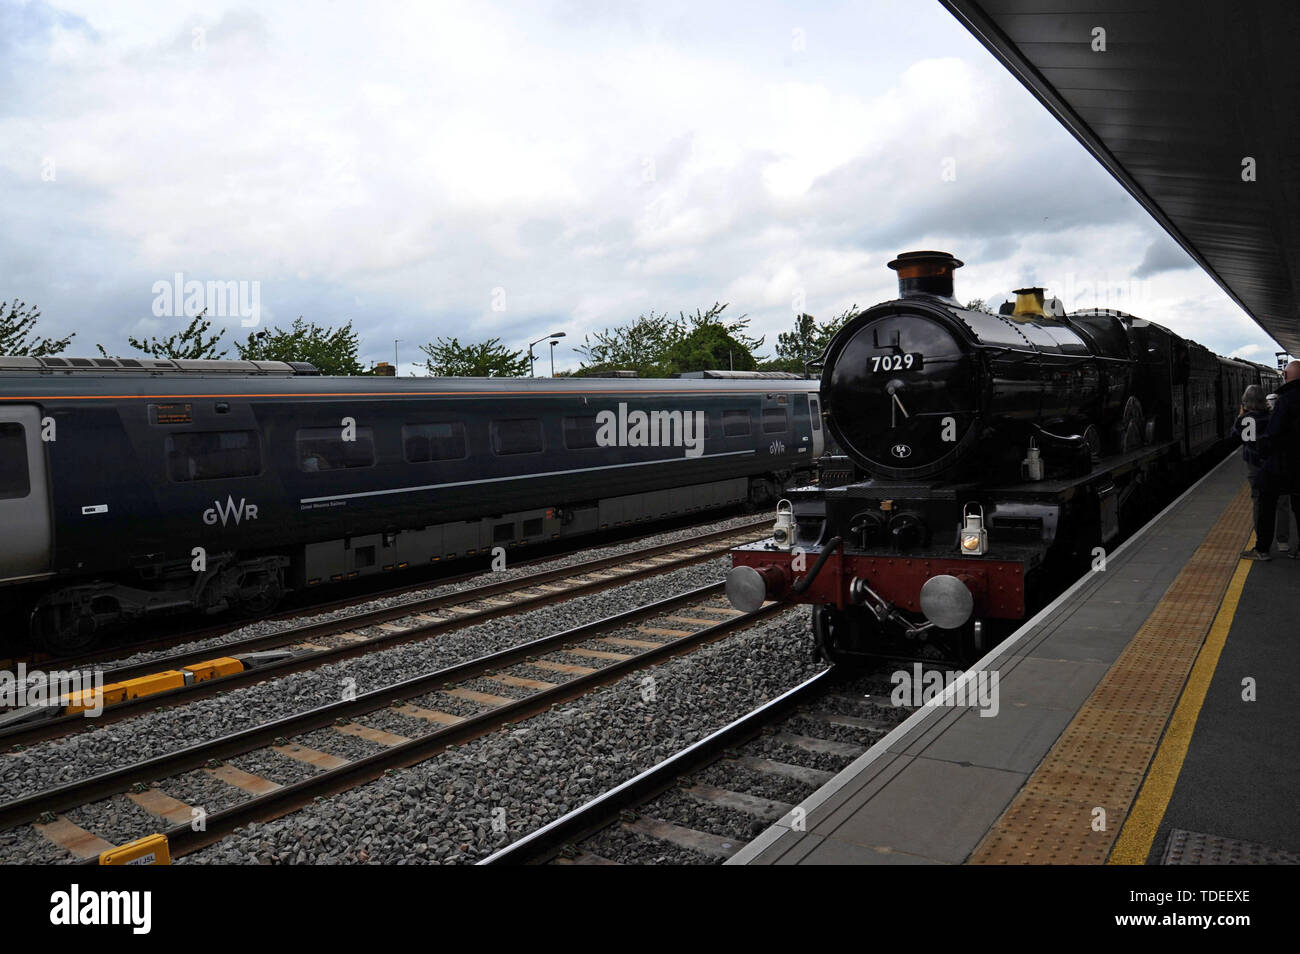 Oxford, UK. 15th June 2019. Ex Great Western Railway locomotive 7029 Clun Castle arrives at Oxford station on a steam railtour. The railtour is part of the 175 anniversary celebration for the opening of the Oxford to Didcot Railway. G.P.Essex/Alamy Live News Stock Photo